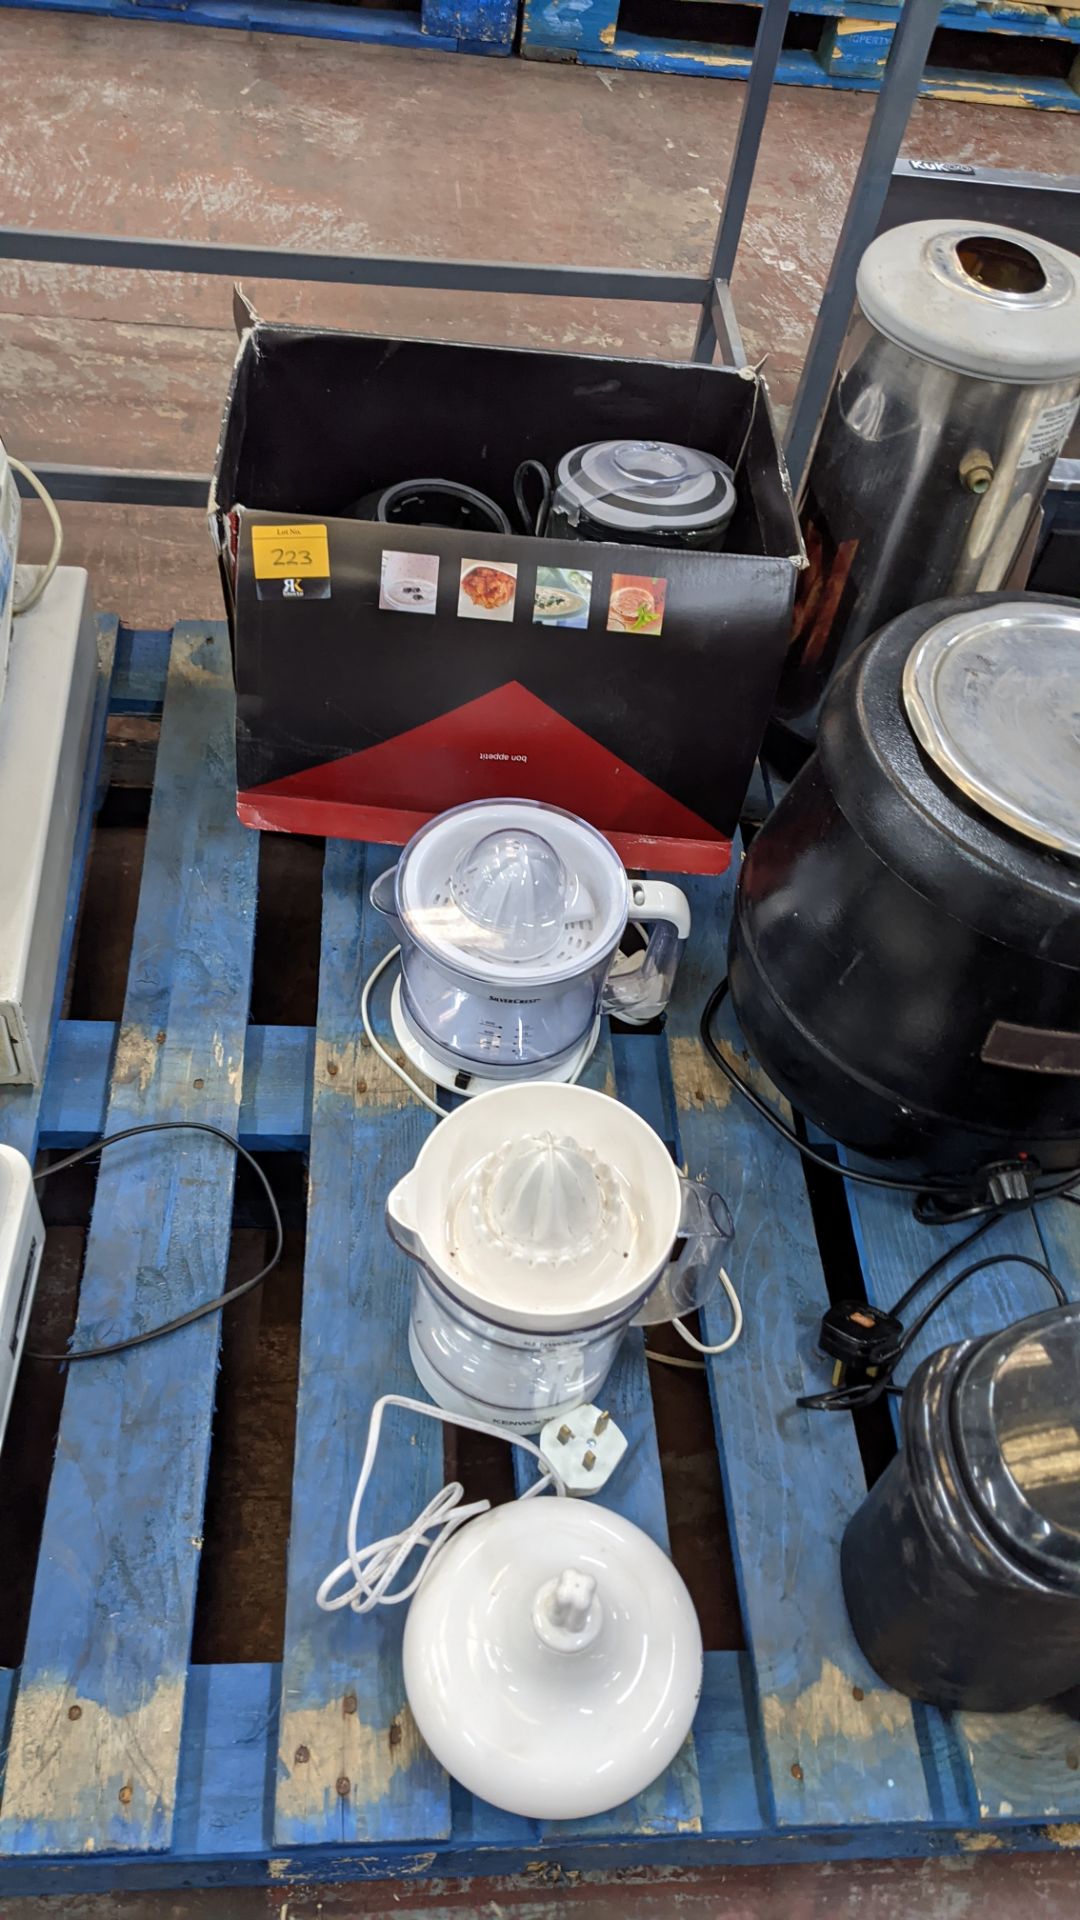 Row of assorted electric blenders, juicers and similar